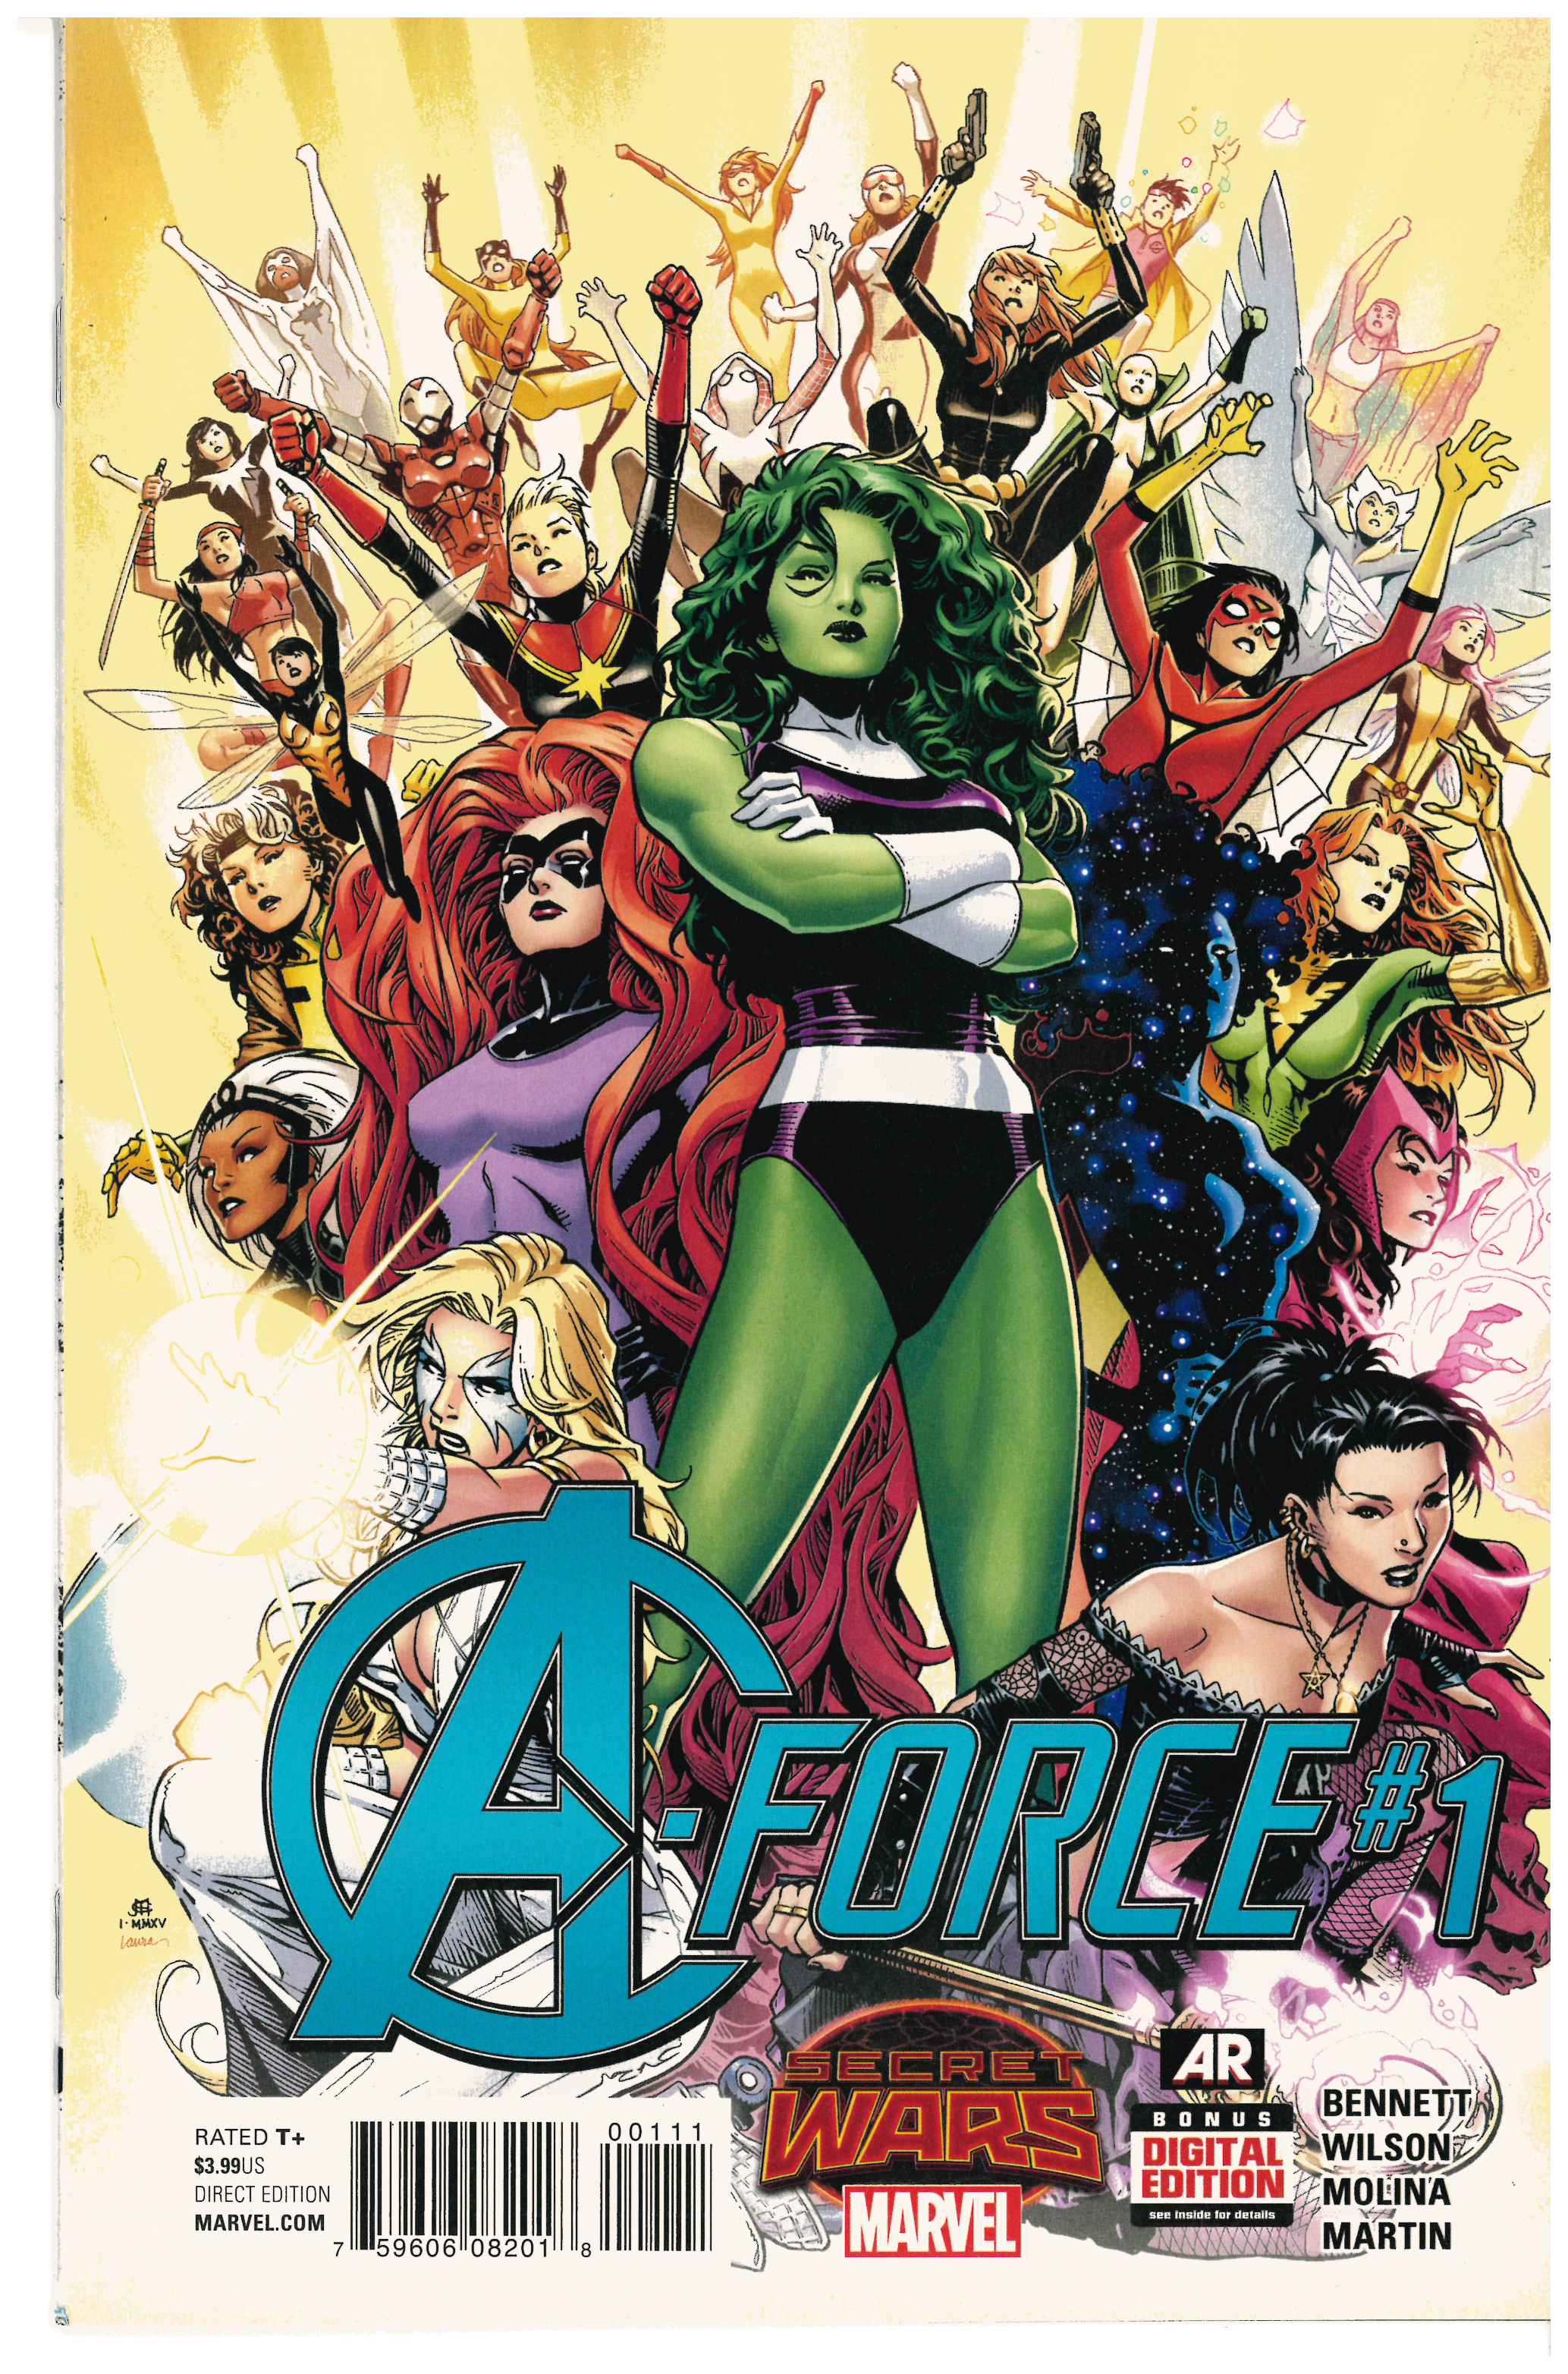 A-Force #1 Jim Cheung Cover 